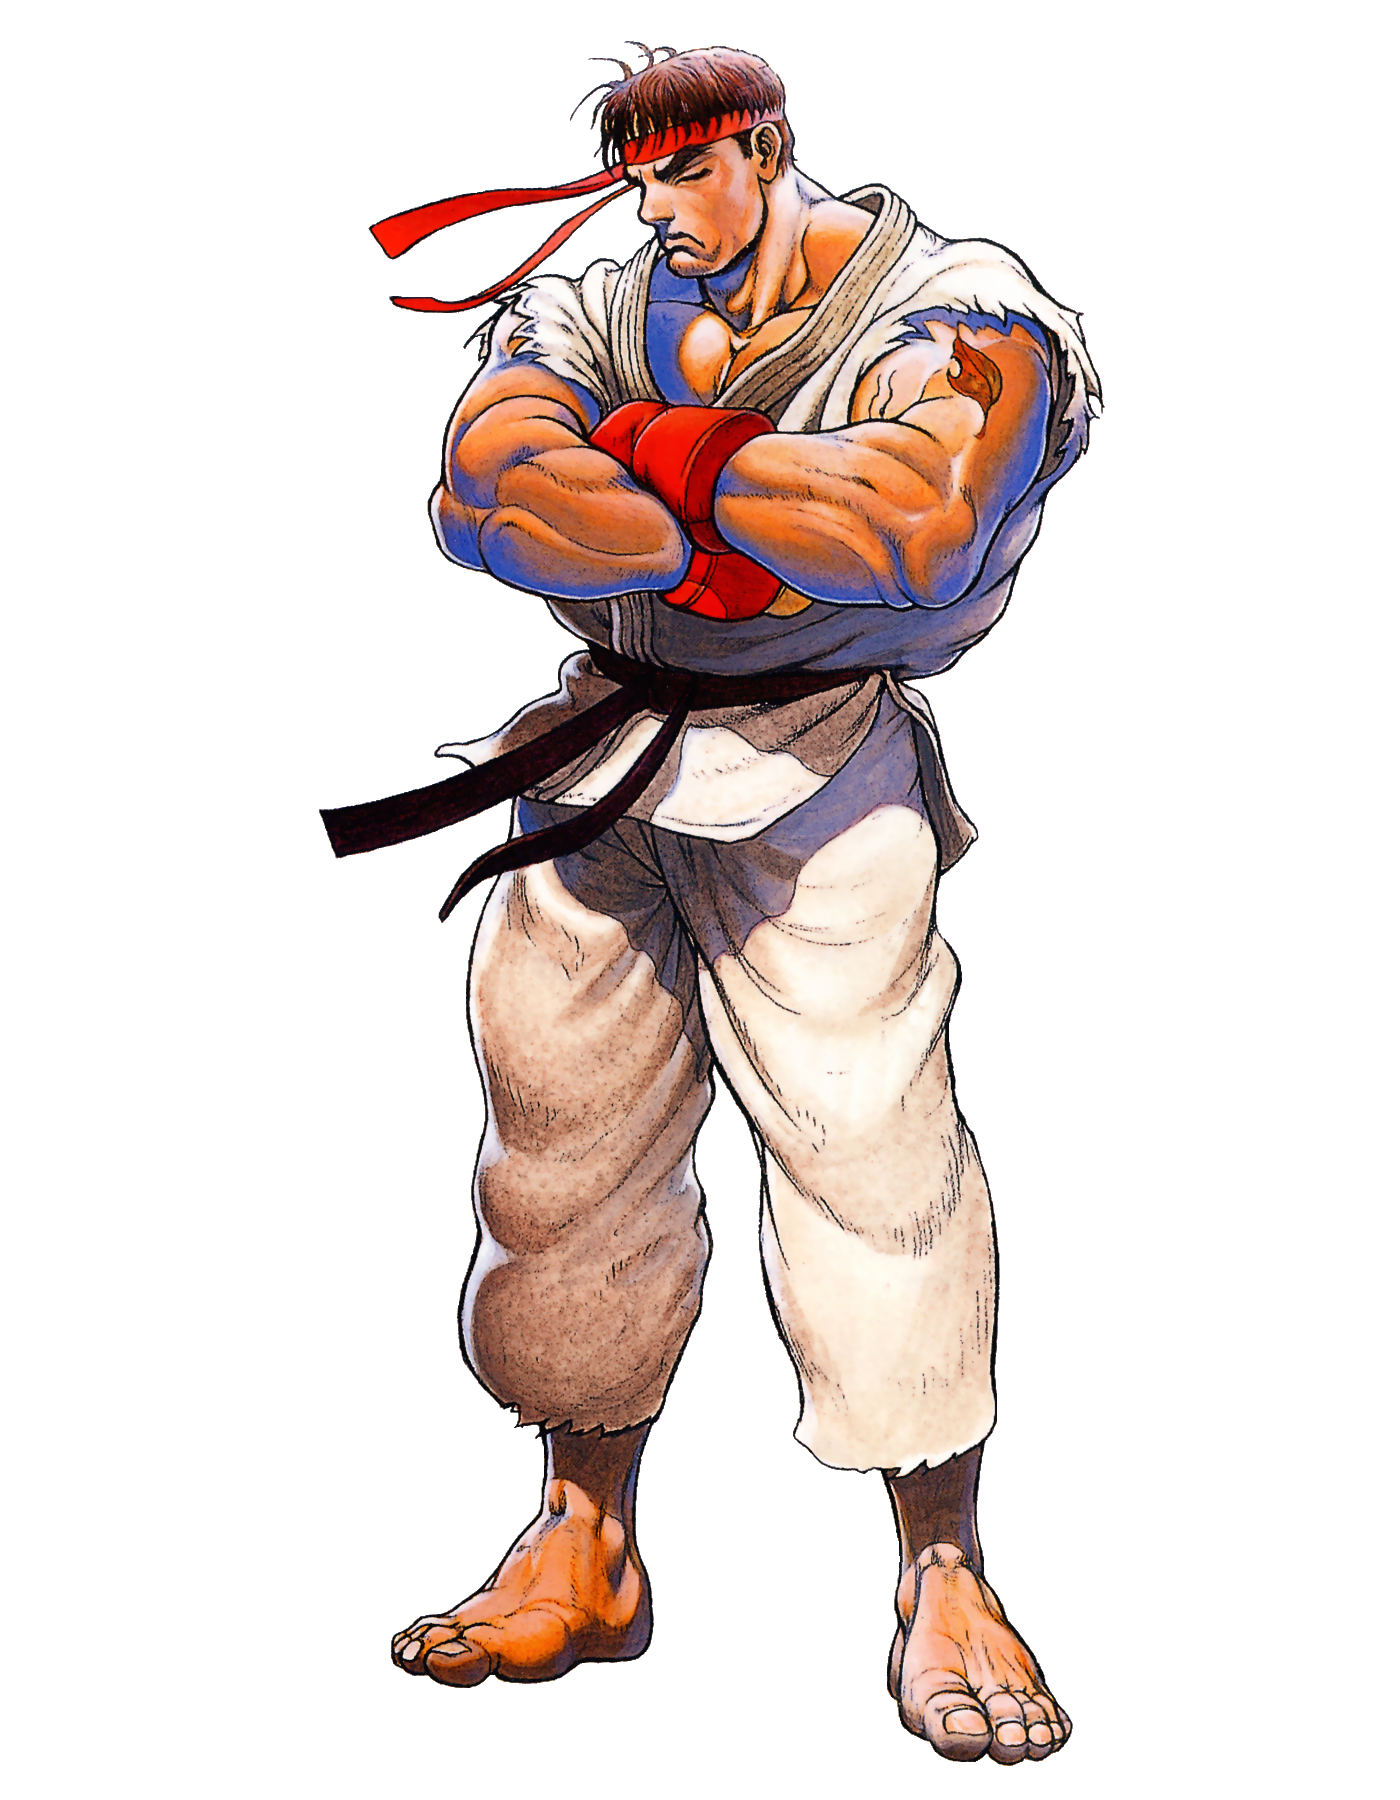 will there be street fighter 6